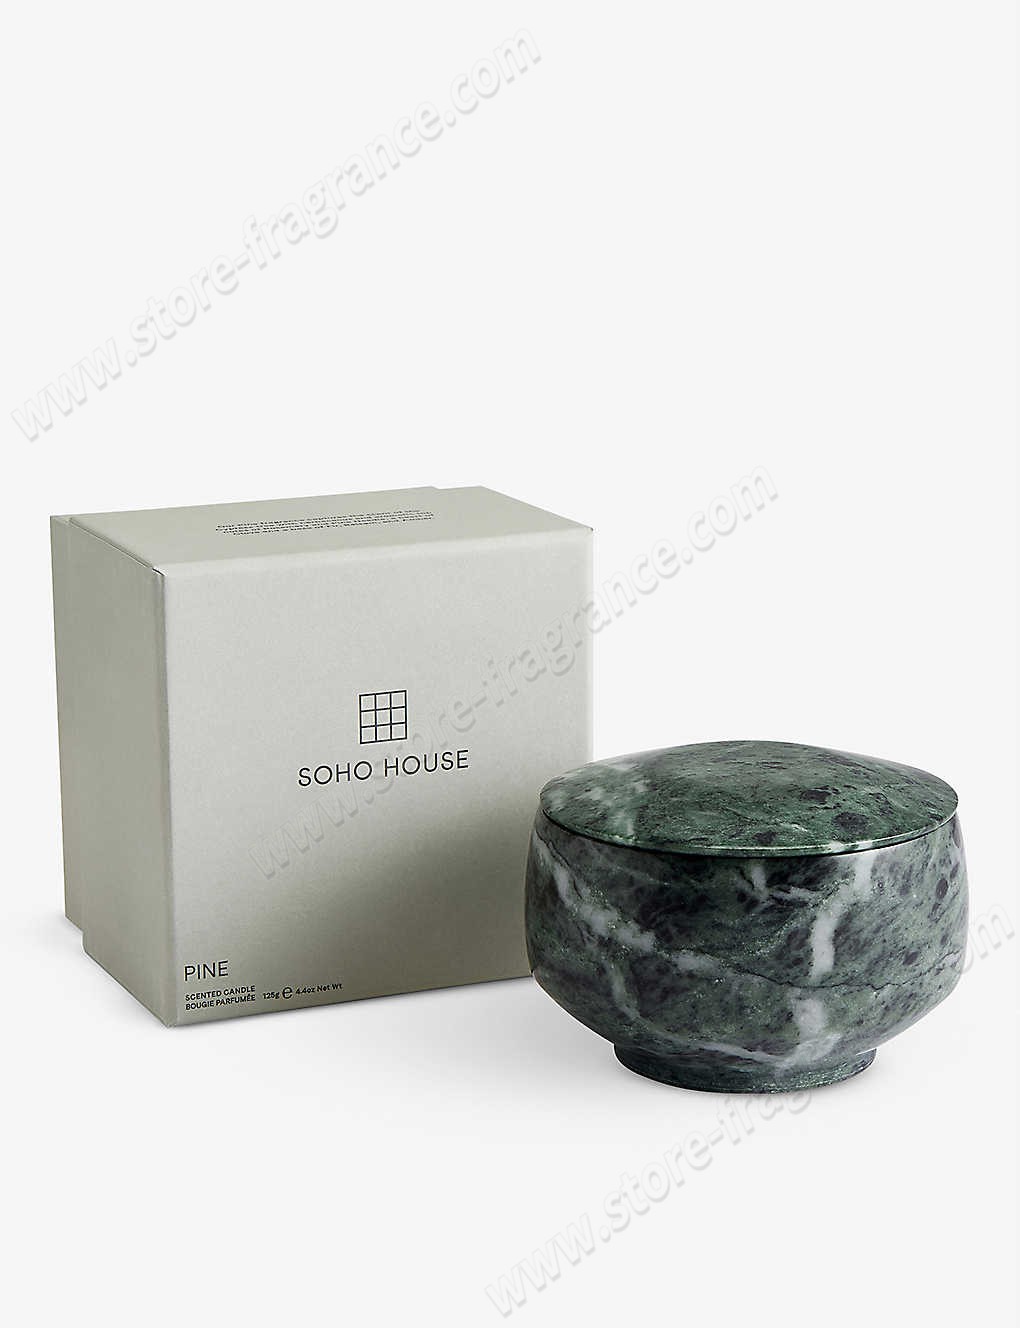 SOHO HOME/Rocca marble pine scented candle 125g ✿ Discount Store - SOHO HOME/Rocca marble pine scented candle 125g ✿ Discount Store